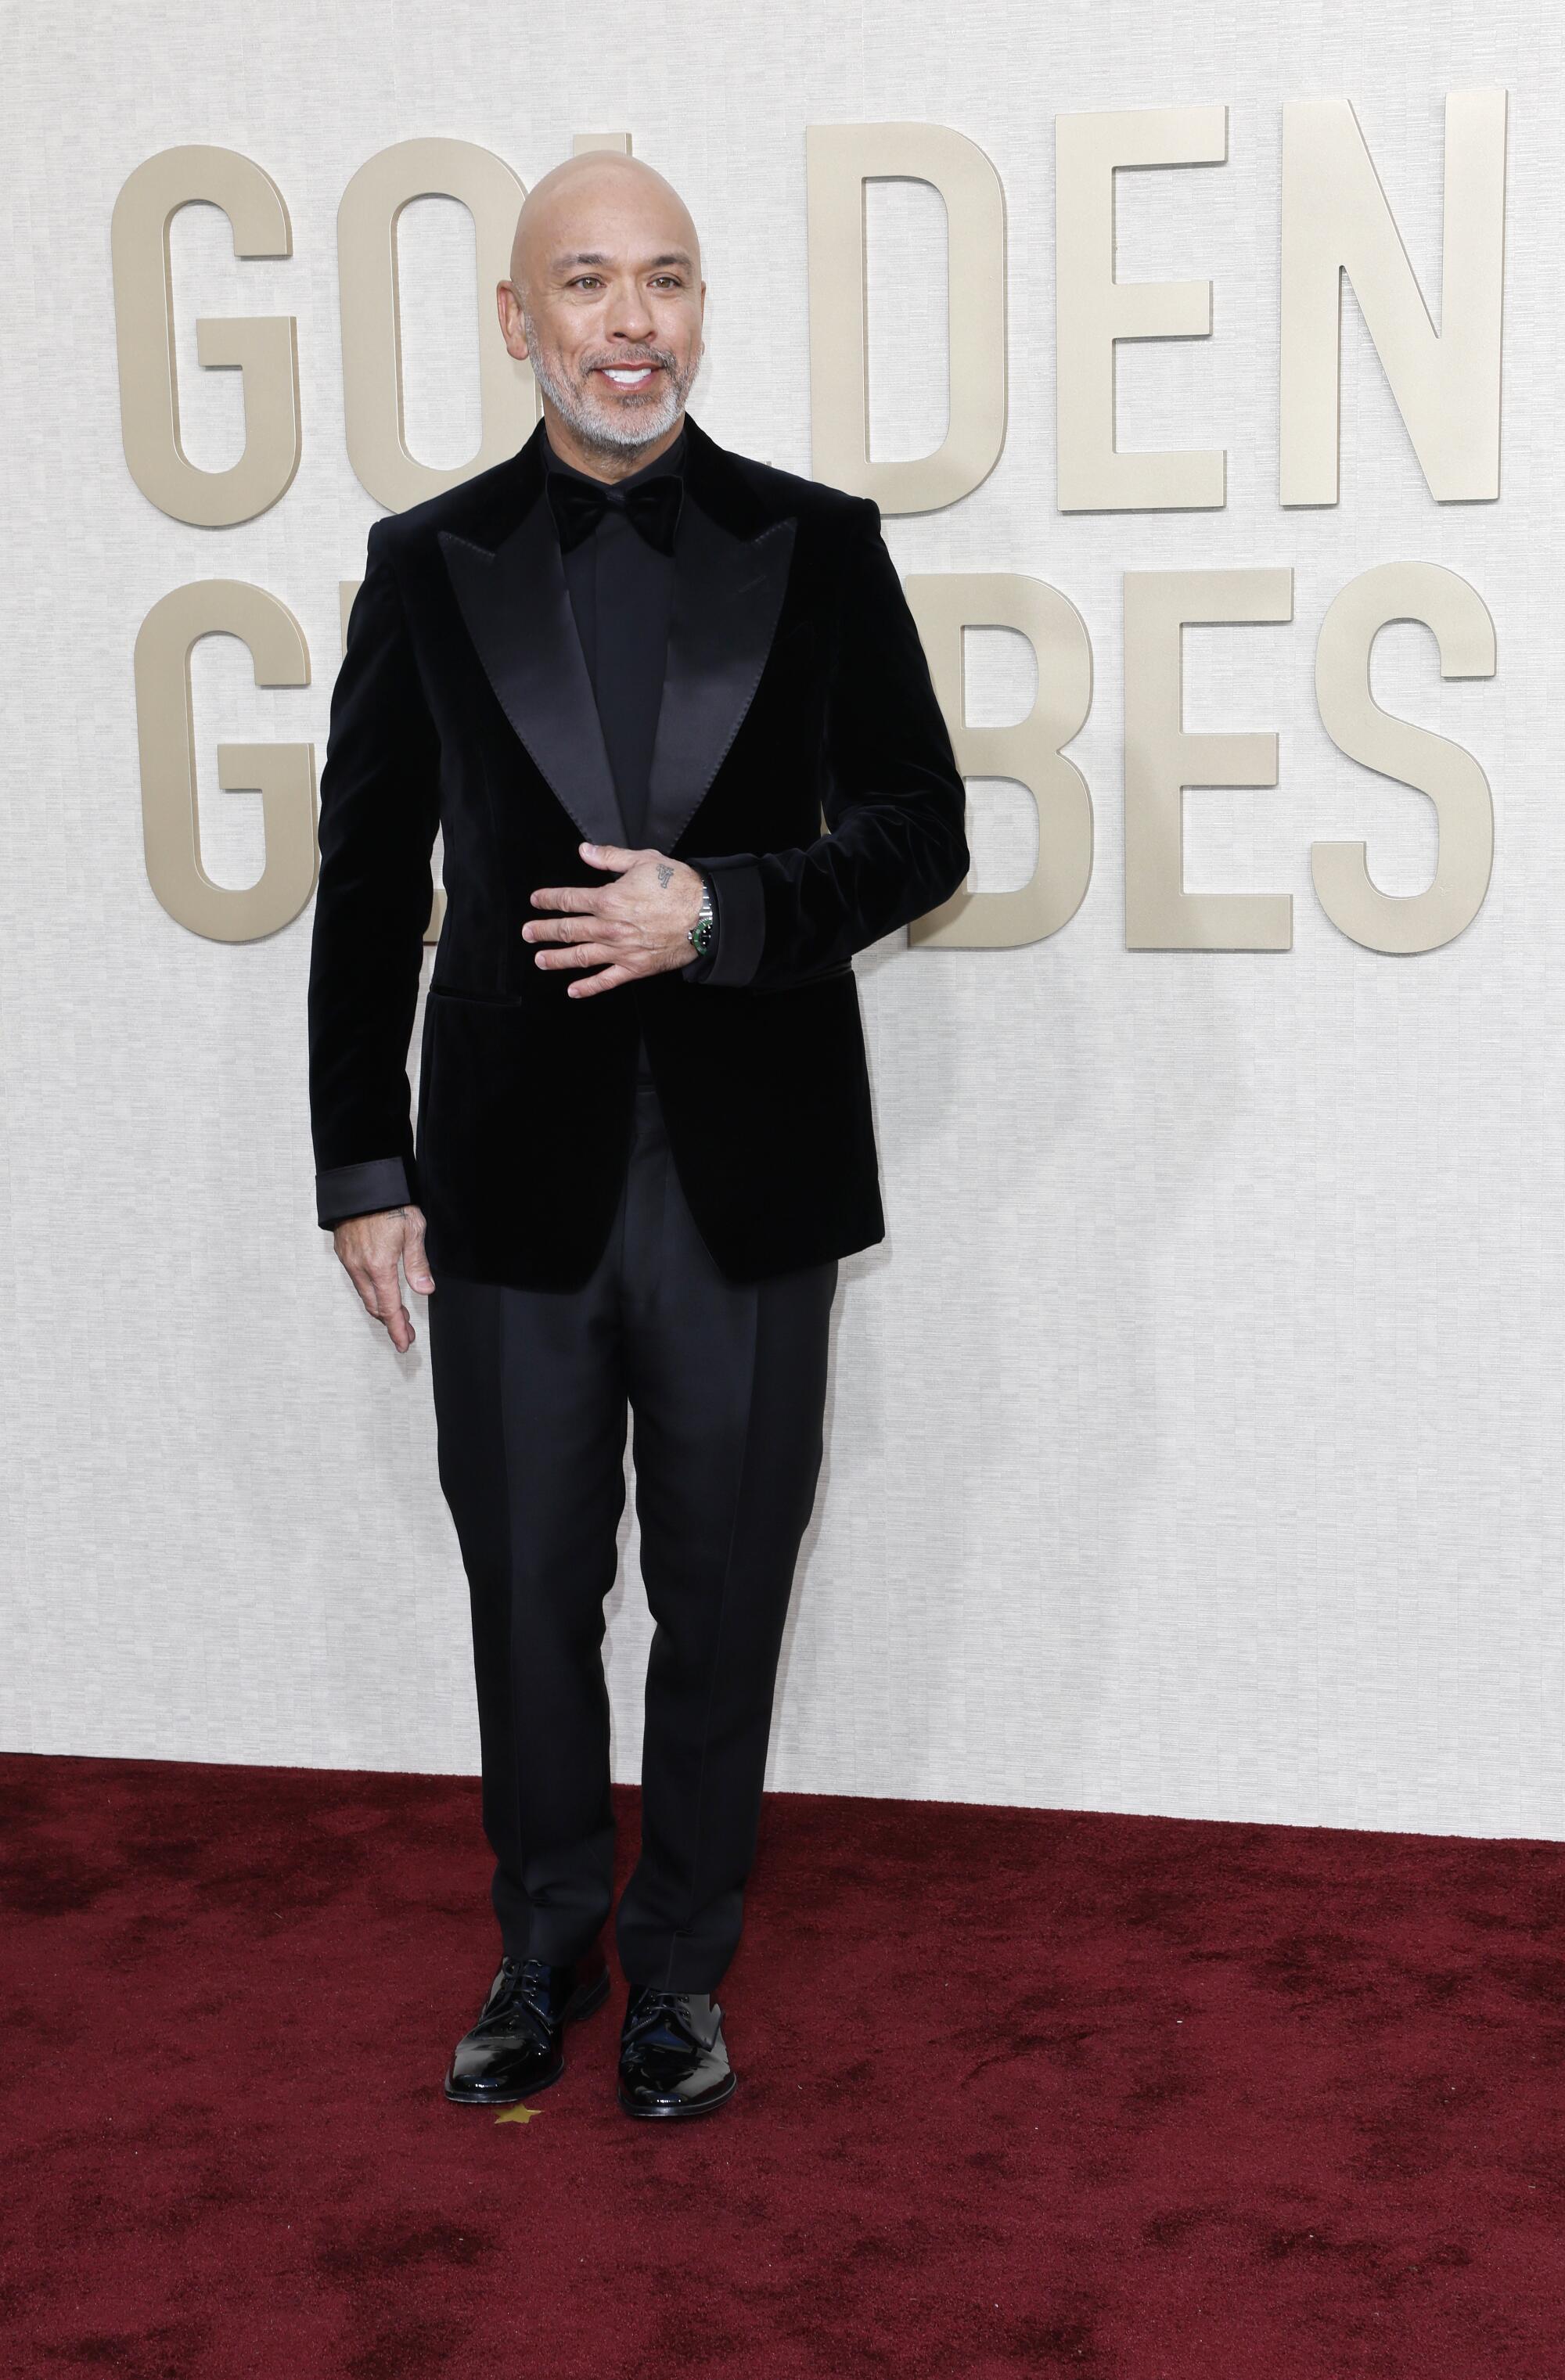 Jo Koy on the red carpet of the 81st Golden Globe Awards at the Beverly Hilton.